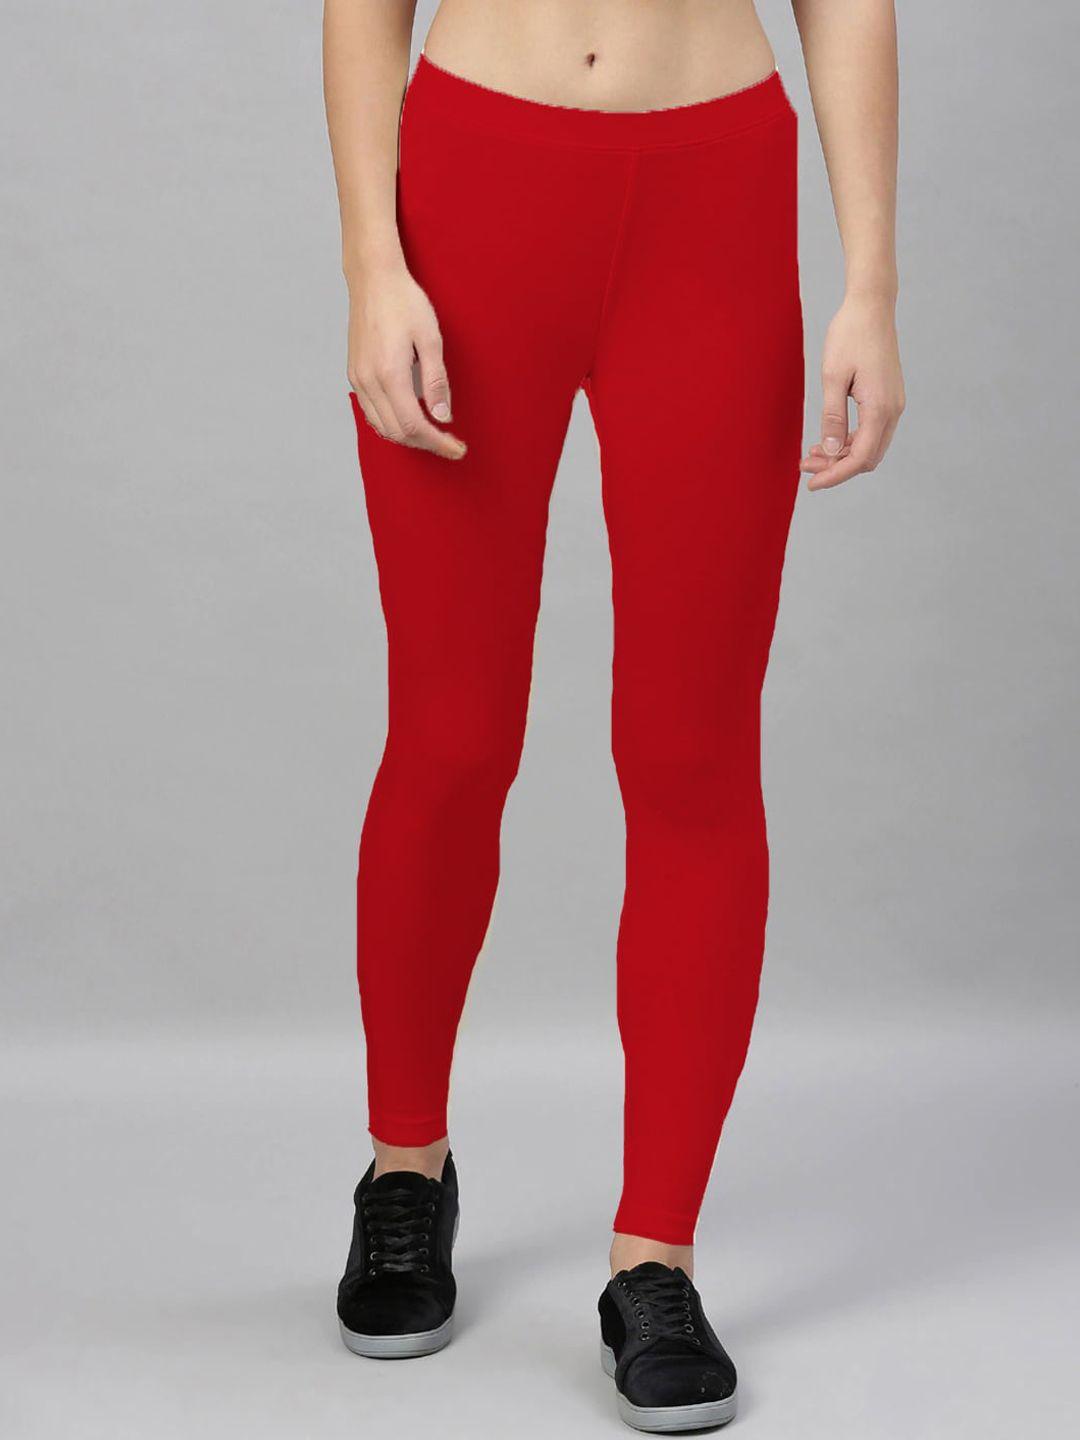 kryptic-women-red-solid-cotton-ankle-length-leggings